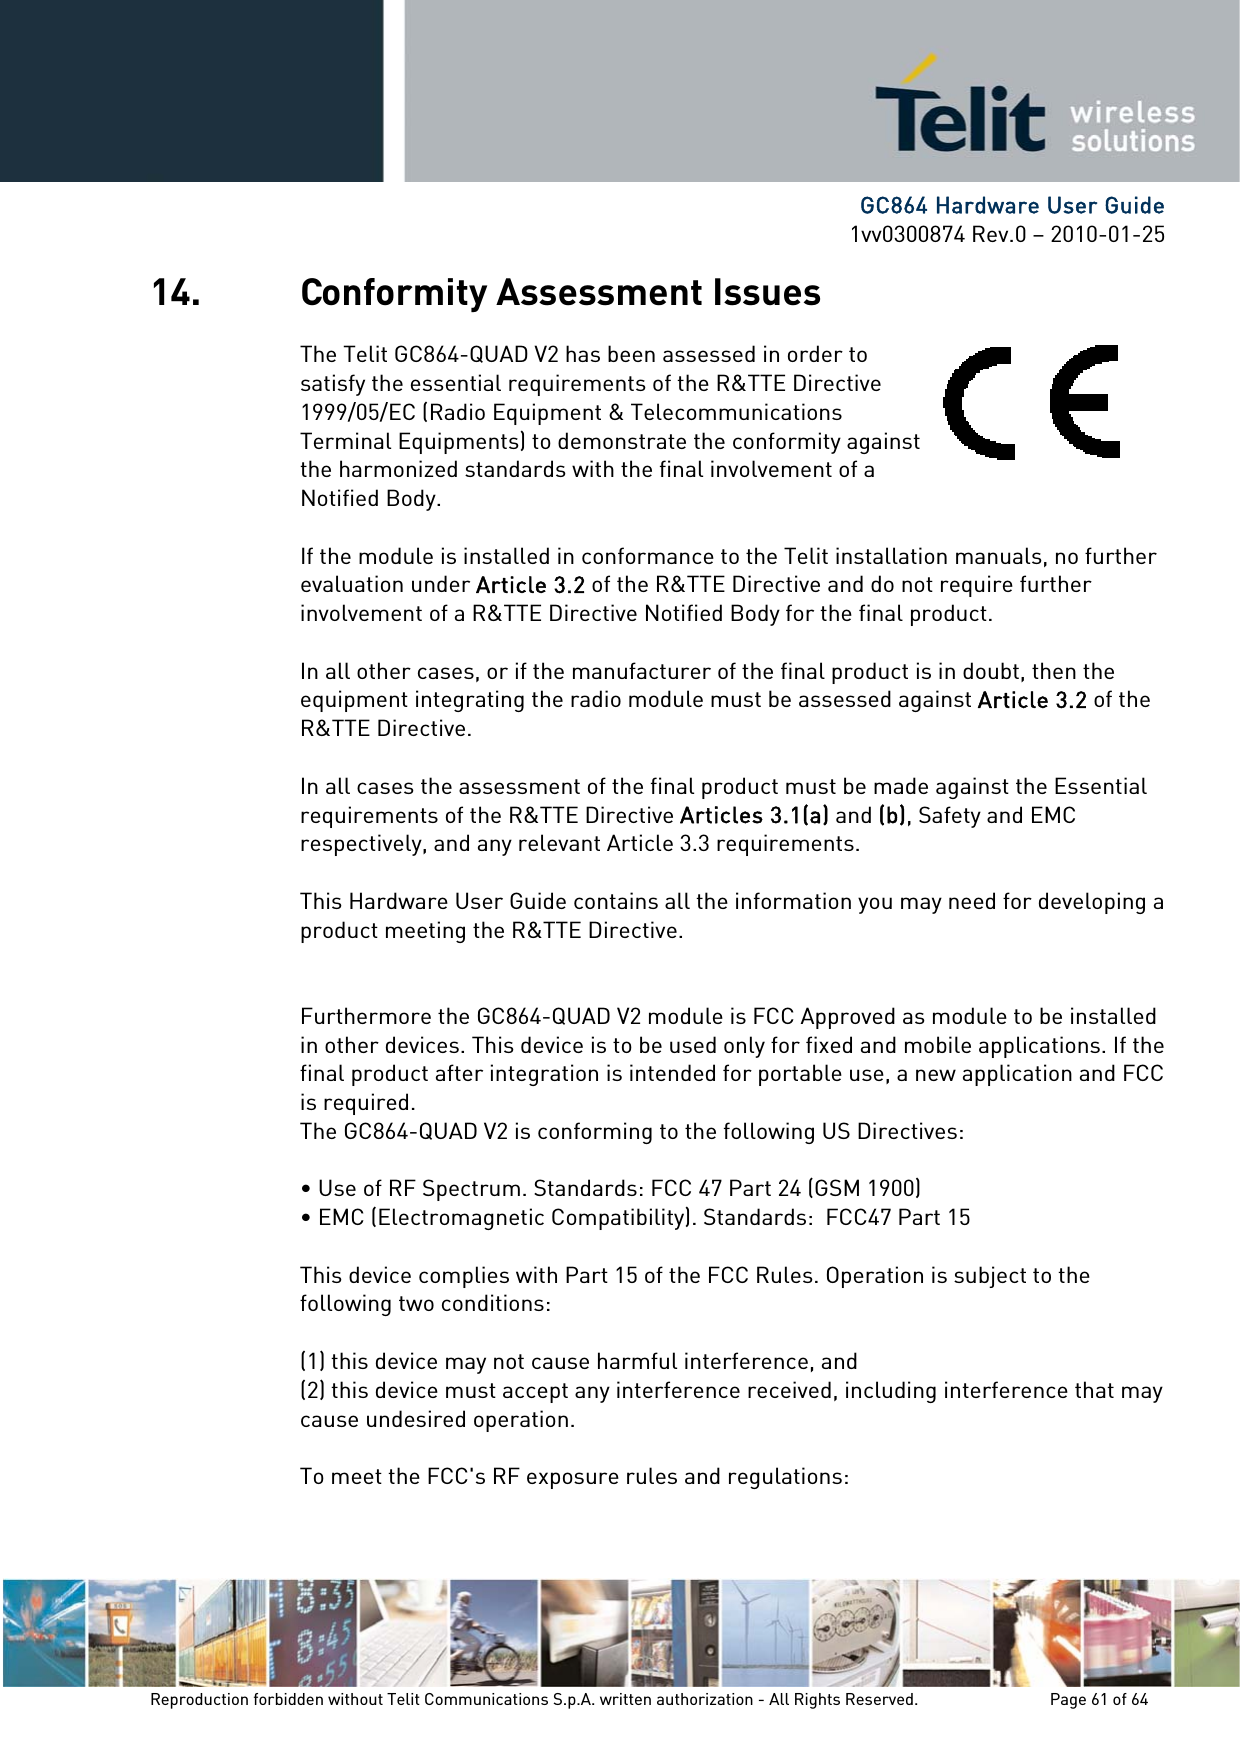      GC864 Hardware User Guide 1vv0300874 Rev.0 – 2010-01-25 Reproduction forbidden without Telit Communications S.p.A. written authorization - All Rights Reserved.    Page 61 of 64  14. Conformity Assessment Issues The Telit GC864-QUAD V2 has been assessed in order to satisfy the essential requirements of the R&amp;TTE Directive 1999/05/EC (Radio Equipment &amp; Telecommunications Terminal Equipments) to demonstrate the conformity against the harmonized standards with the final involvement of a Notified Body.  If the module is installed in conformance to the Telit installation manuals, no further evaluation under Article 3.2 of the R&amp;TTE Directive and do not require further involvement of a R&amp;TTE Directive Notified Body for the final product.  In all other cases, or if the manufacturer of the final product is in doubt, then the equipment integrating the radio module must be assessed against Article 3.2 of the R&amp;TTE Directive.  In all cases the assessment of the final product must be made against the Essential requirements of the R&amp;TTE Directive Articles 3.1(a) and (b), Safety and EMC respectively, and any relevant Article 3.3 requirements.  This Hardware User Guide contains all the information you may need for developing a product meeting the R&amp;TTE Directive.   Furthermore the GC864-QUAD V2 module is FCC Approved as module to be installed in other devices. This device is to be used only for fixed and mobile applications. If the final product after integration is intended for portable use, a new application and FCC is required. The GC864-QUAD V2 is conforming to the following US Directives:  • Use of RF Spectrum. Standards: FCC 47 Part 24 (GSM 1900) • EMC (Electromagnetic Compatibility). Standards:  FCC47 Part 15  This device complies with Part 15 of the FCC Rules. Operation is subject to the following two conditions:  (1) this device may not cause harmful interference, and (2) this device must accept any interference received, including interference that may cause undesired operation.  To meet the FCC&apos;s RF exposure rules and regulations:  